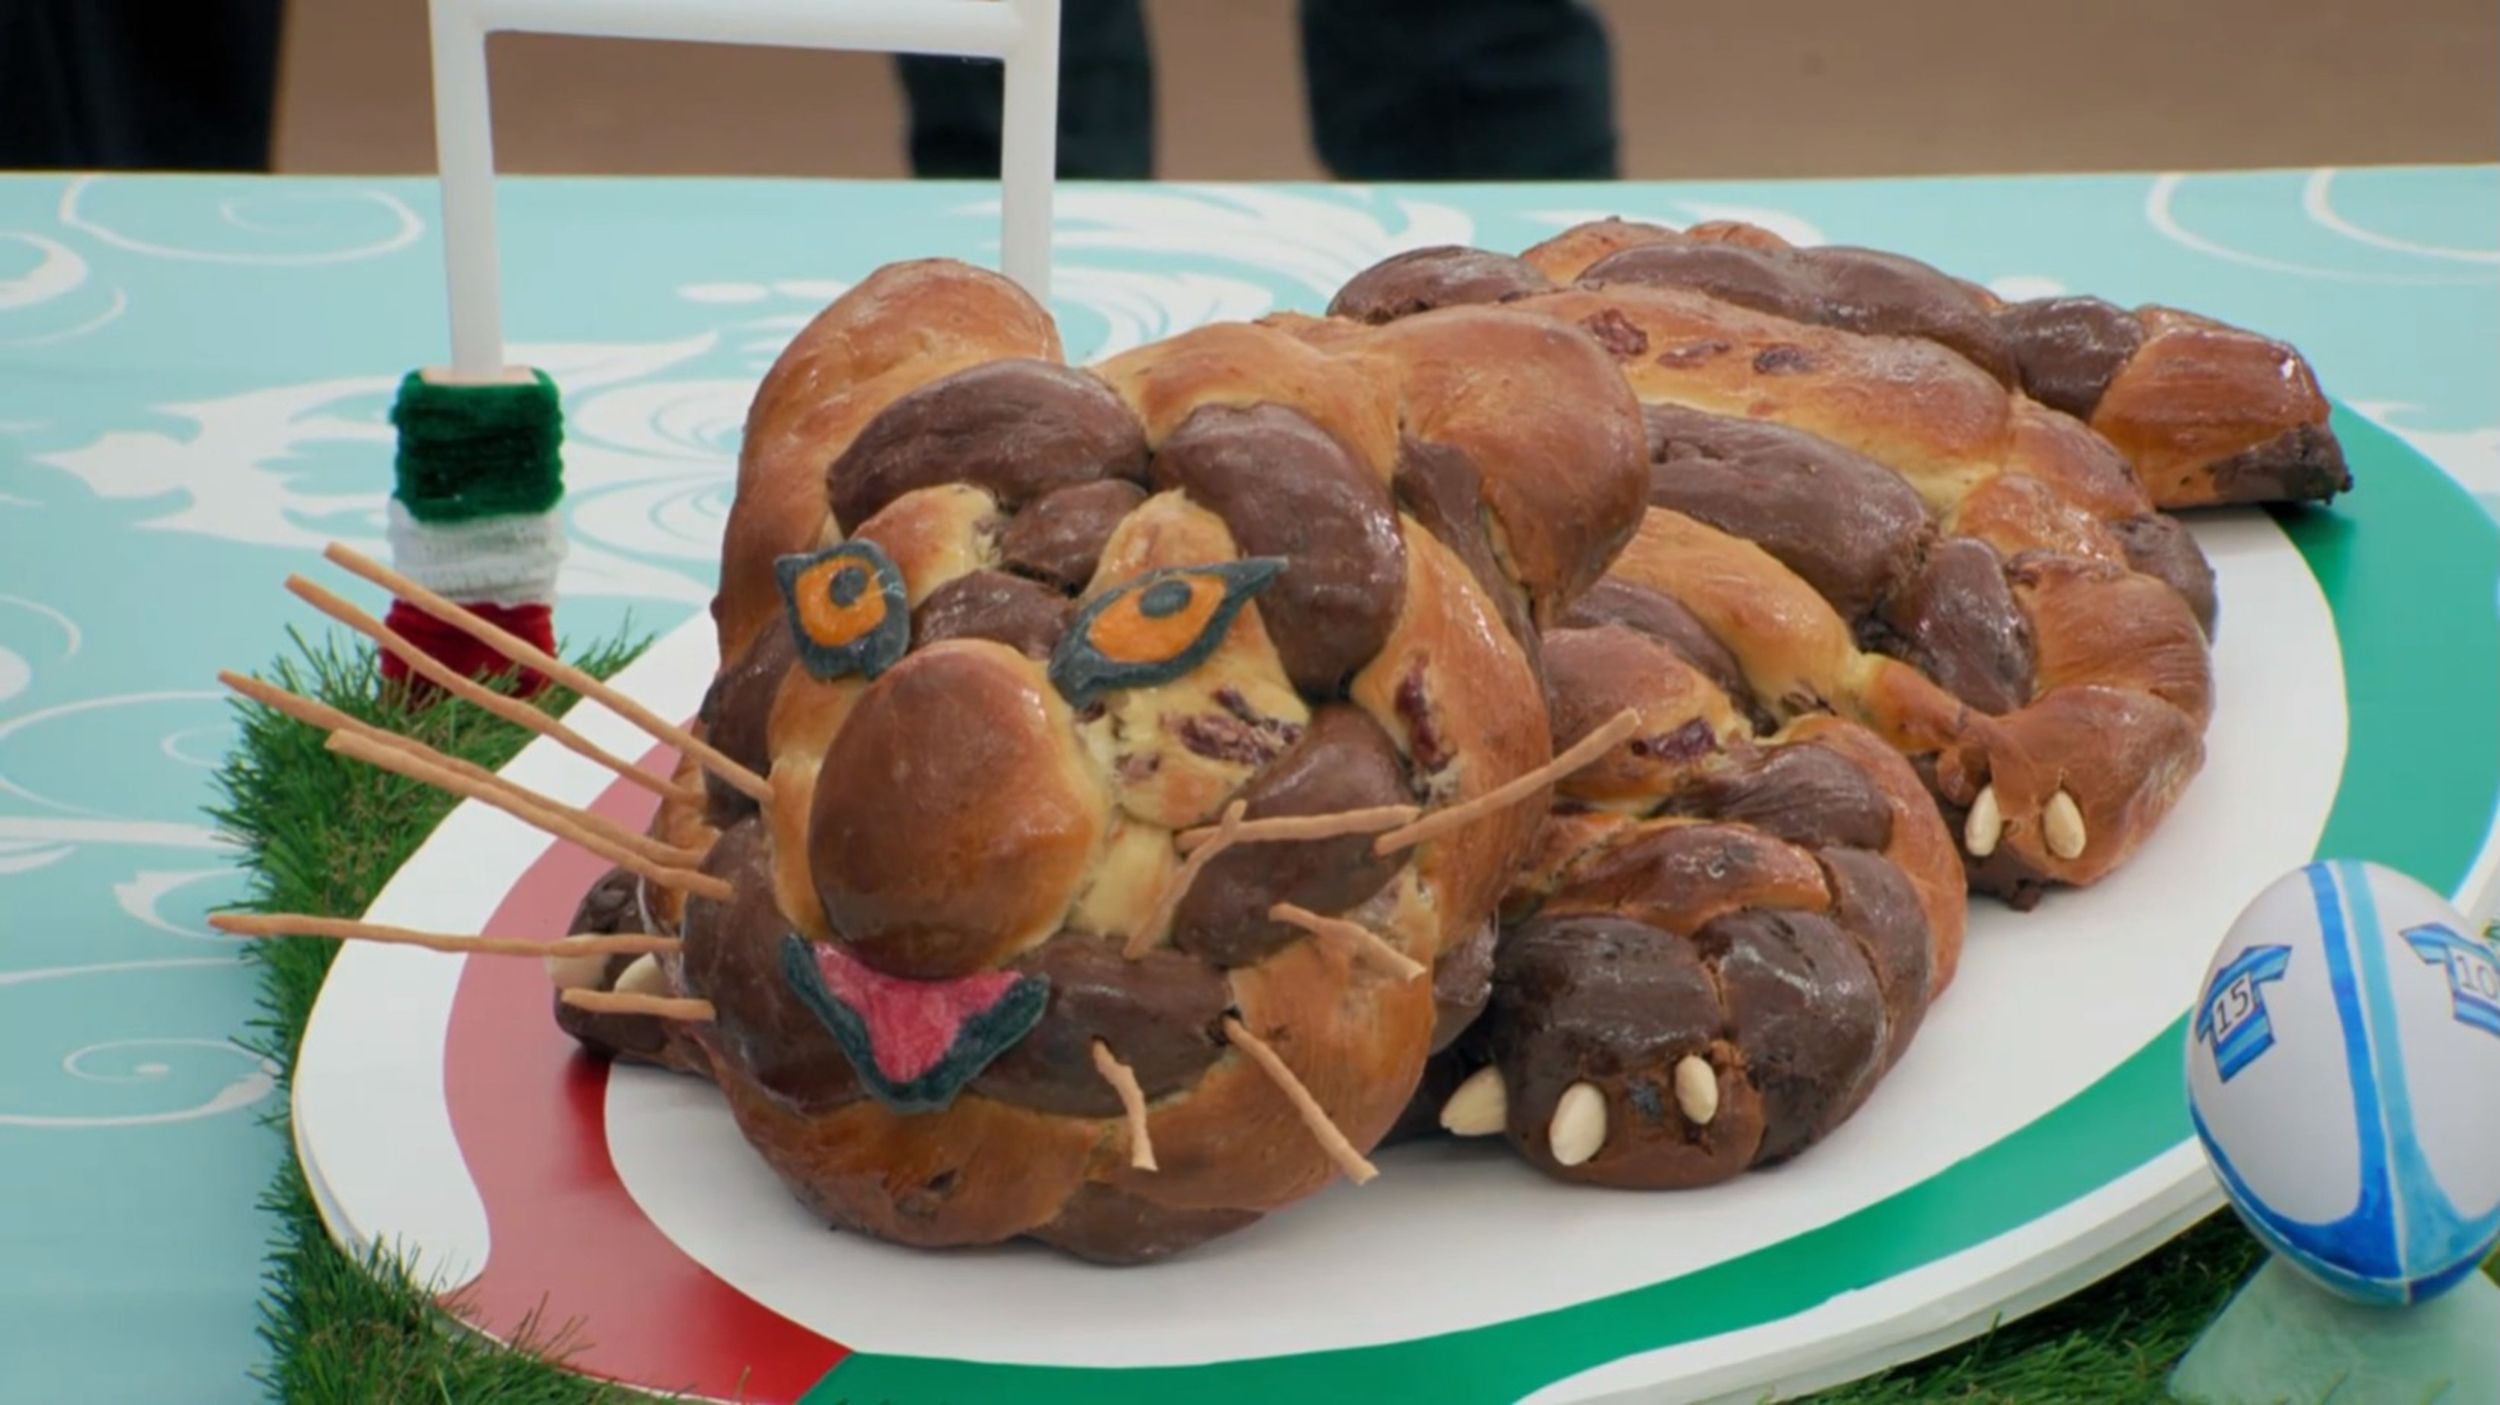 Josh’s Tiger Mascot Showstopper from 'The Great British Baking Show' Season 14's Bread Week